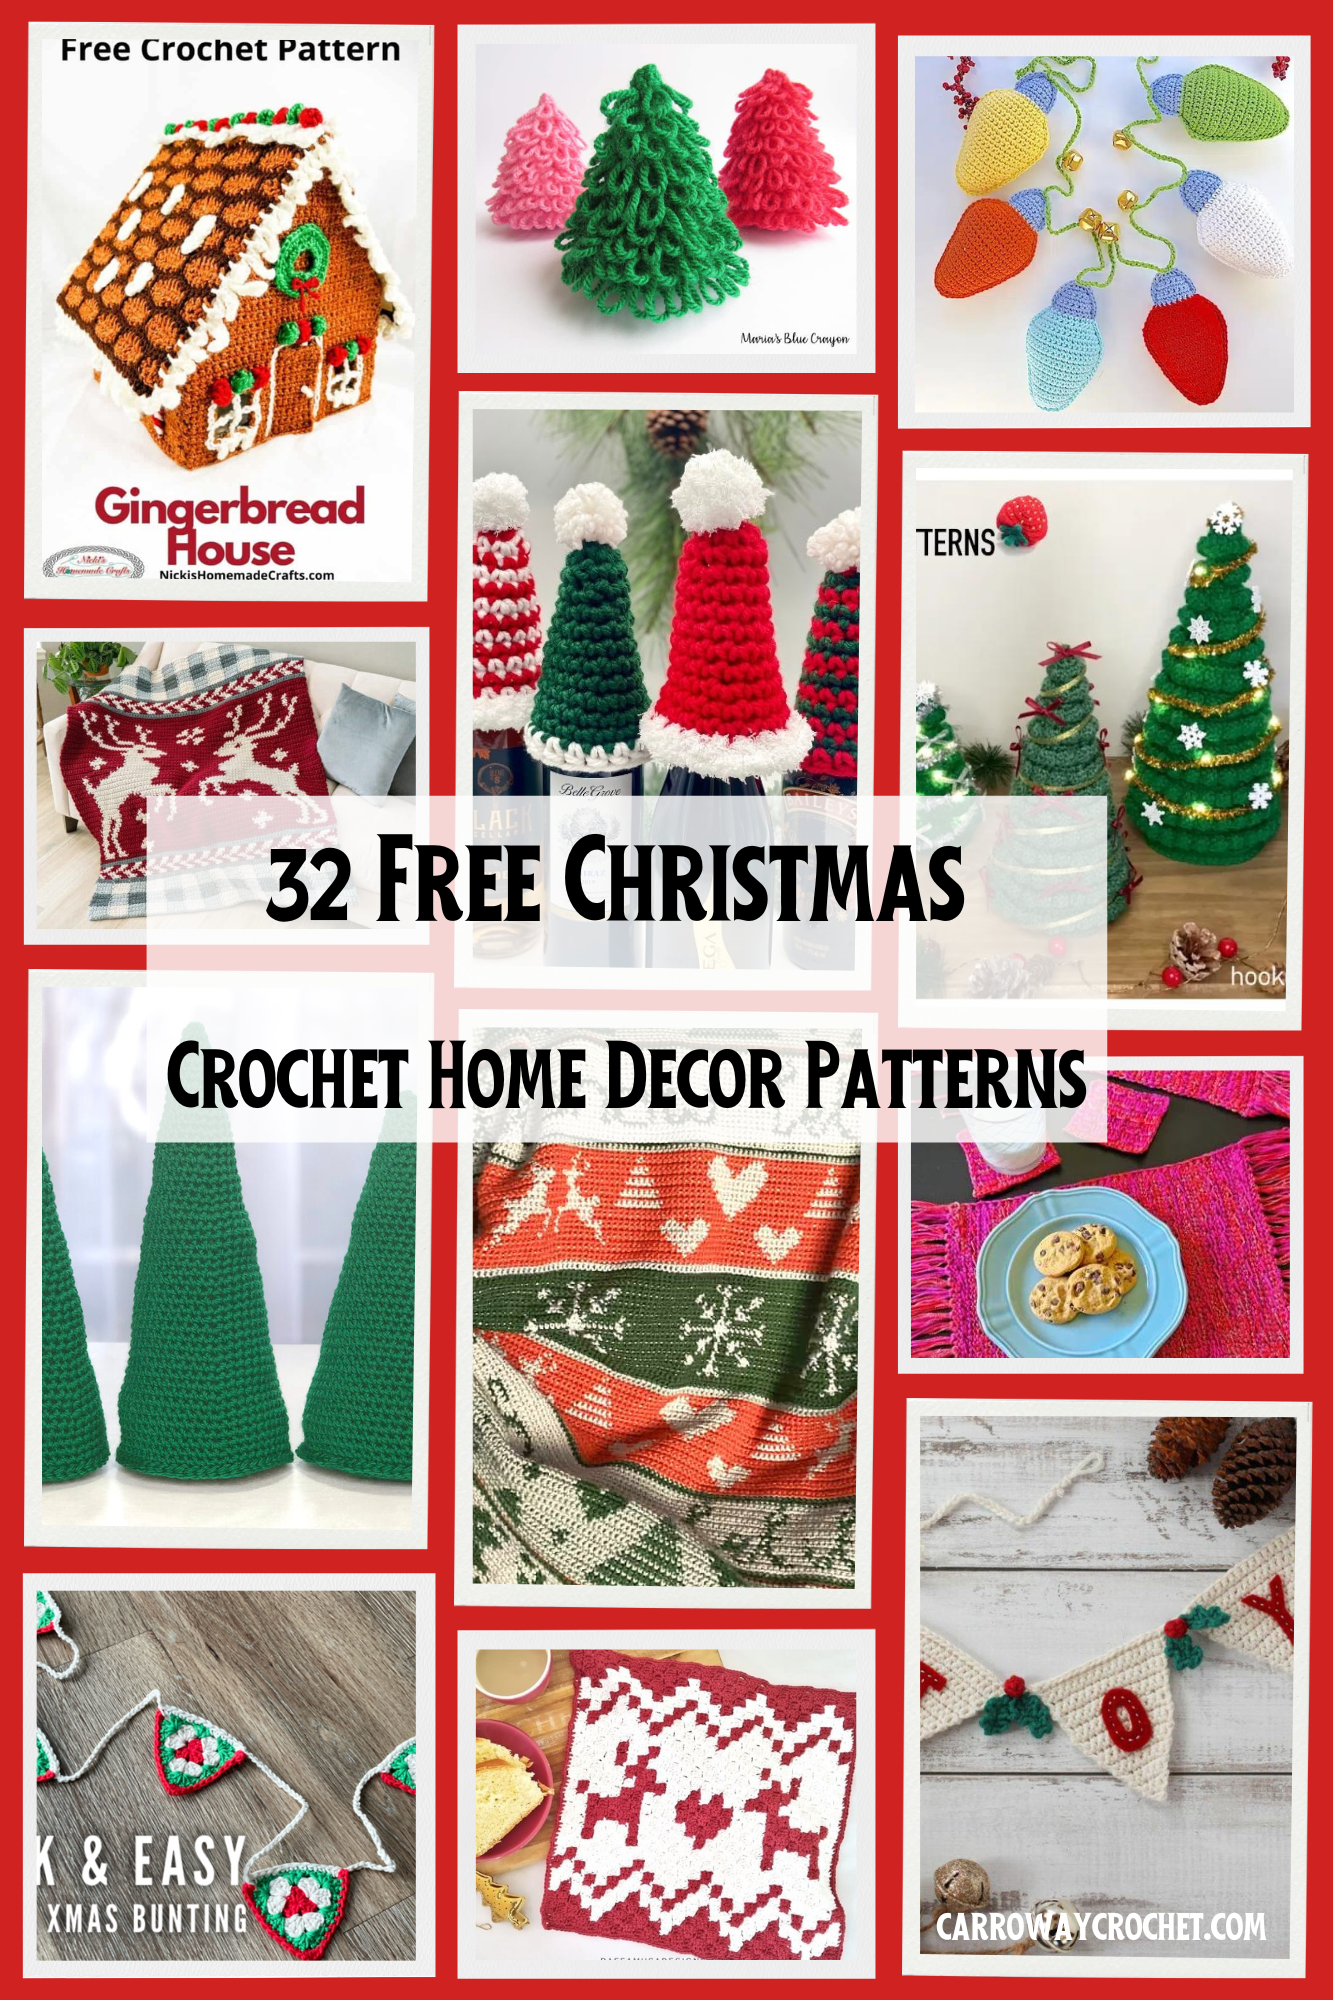 26 Free Crochet Patterns That Make Great Last Minute Christmas Gifts - The  Stitchin Mommy